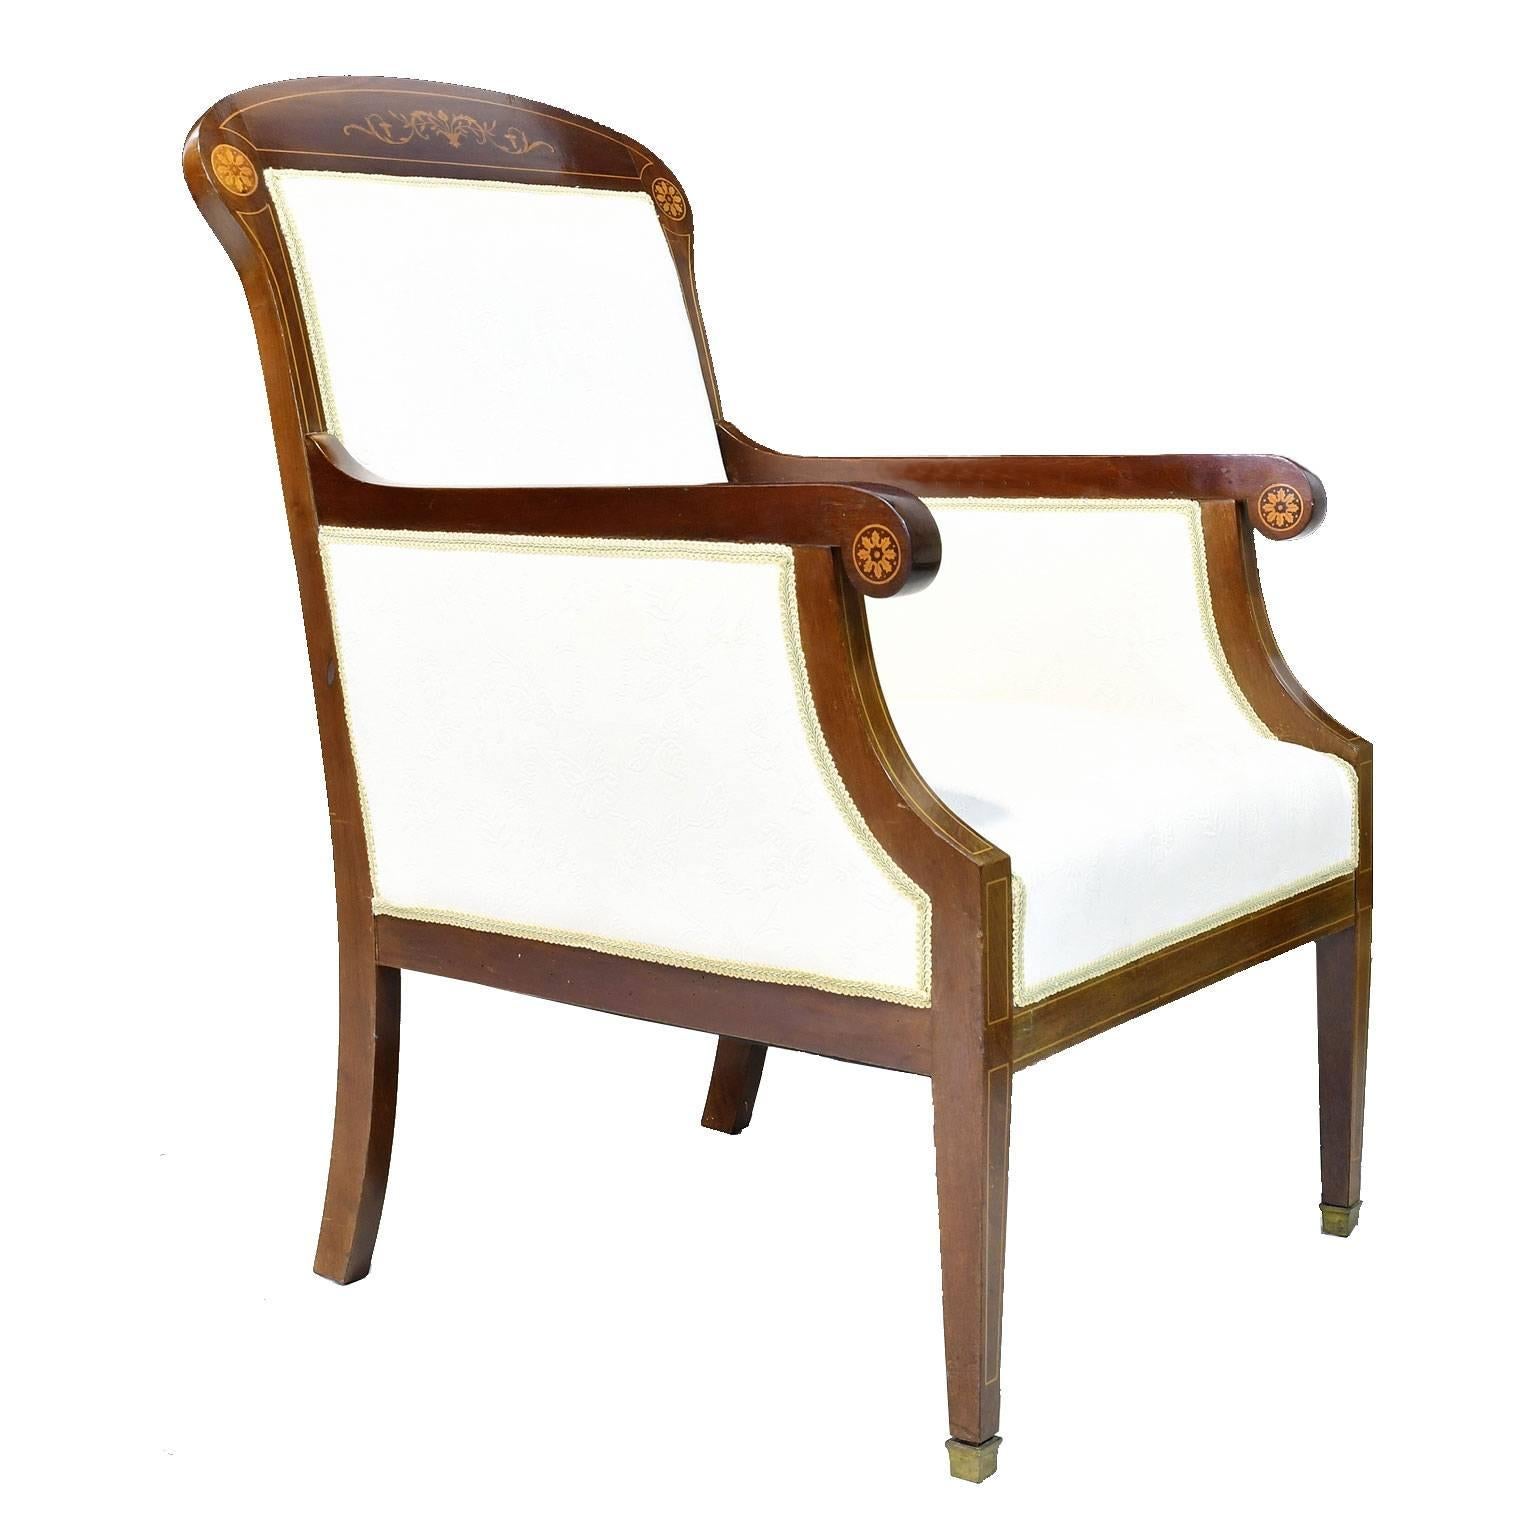 A very fine pair of bergères in beautiful West Indies mahogany with upholstery. Frame has fine inlays in satinwood of pinwheels on the scrolled arms and corners of the rounded crest flanking the center swag with foliate inlays. Chairs rest on